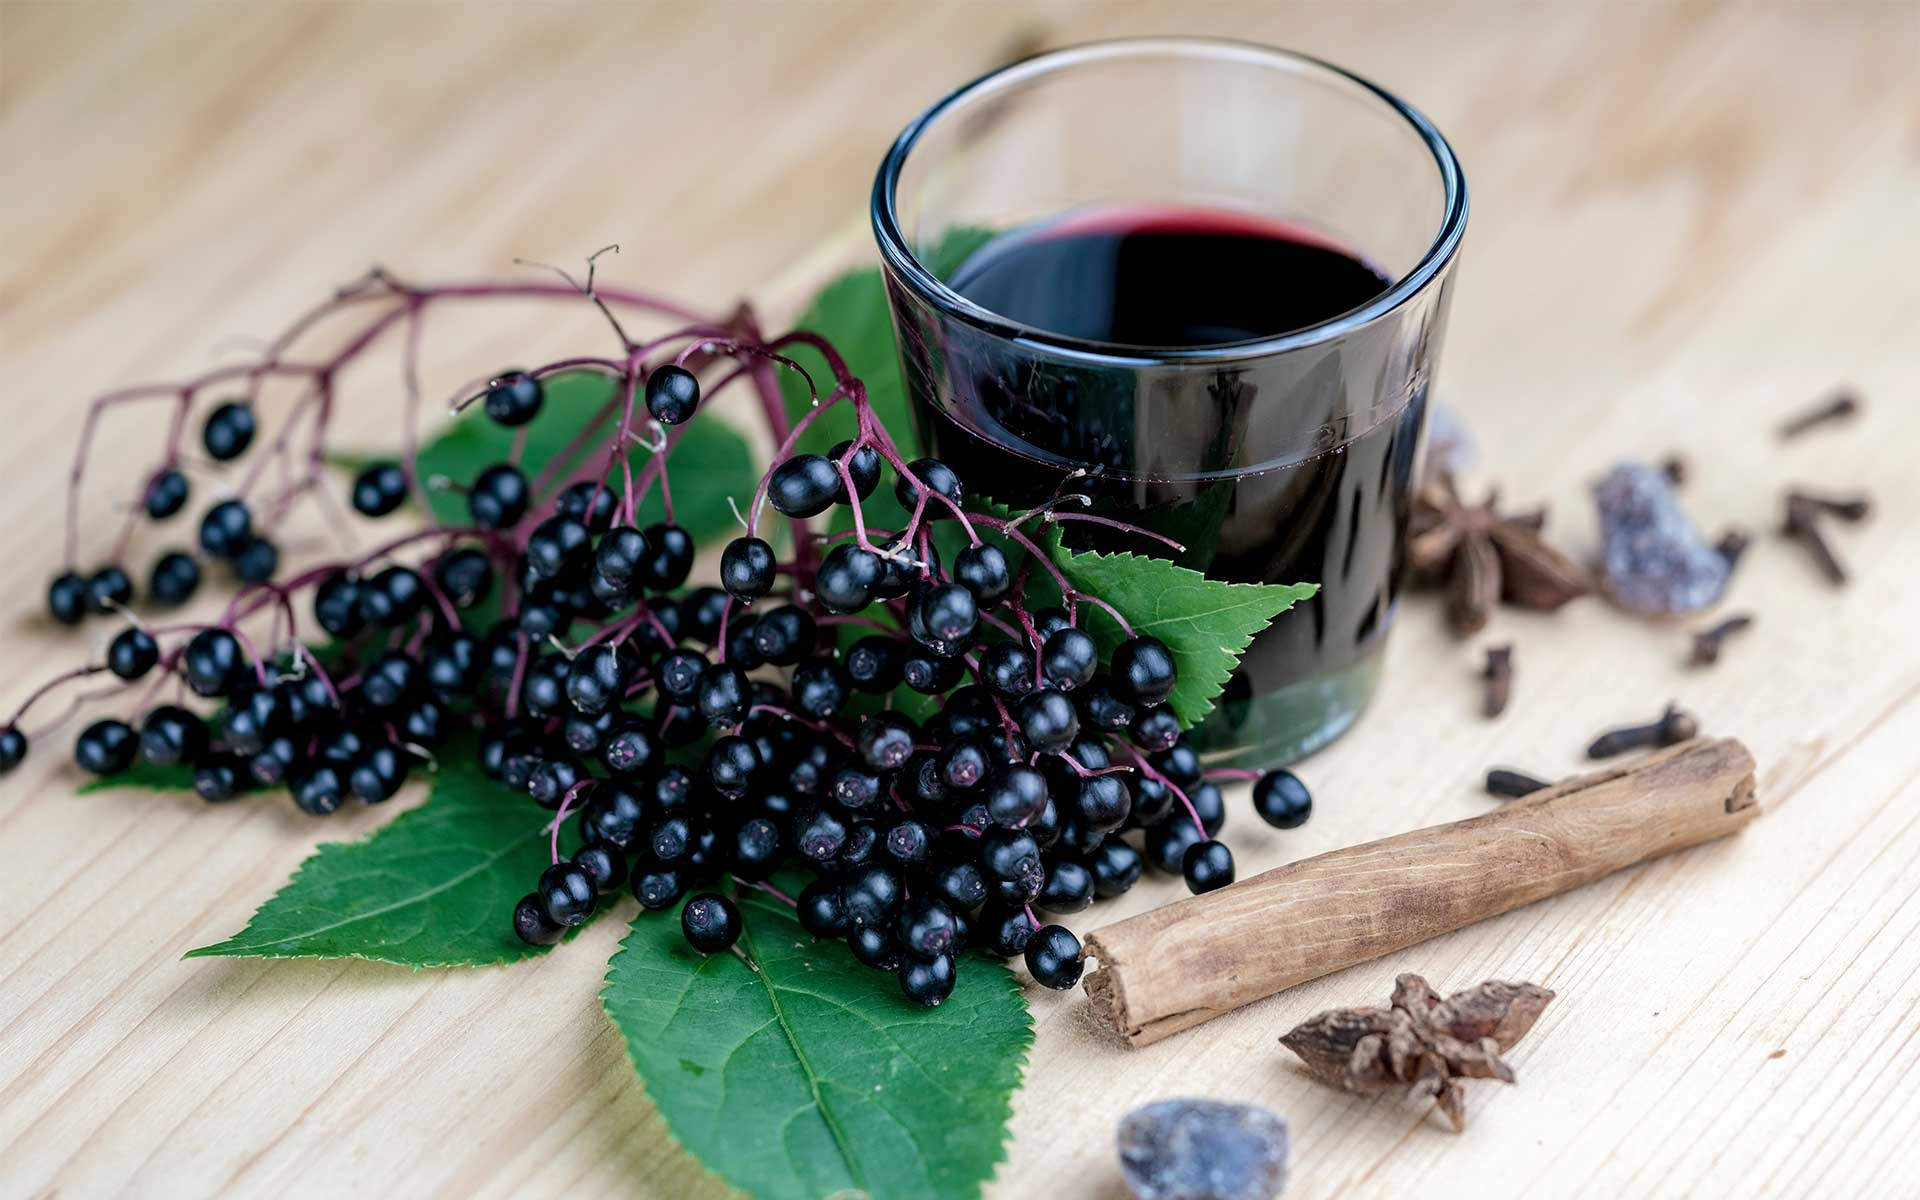 You can also use elderberry as a nutritional supplement. Elderberries that have been dried offer even more benefits. This herb is one of the most trusted for its therapeutic benefits. Elderberry is recommended by experts to boost immunity and reduce symptoms of illness. What are the health benefits associated with Elderberry? These are the health benefits and recommendations for elderberry consumption. Tadapox is the generic name of cialis which is used to treat erectile dysfunction in men. Dapoxetine, on the other hand, is used to treat premature climax/ejaculation during intercourse. What's Elderberry? Sambucas trees are Adoxaceae flowering plants and come in many forms, including Elderberry. Although the European elderberry tree is most popular, it can be grown anywhere in the world. Elderberries can reach up to 30 feet in height and produce clusters of flowering plants, also known as elderflowers. There are many varieties of blue and black berries.. This is primarily used to treat Erectile Dysfunction. Elderberry blossoms are possible to use in some recipes. However, the main ingredient of most elderberry recipes is the berries. Helps Fight Flu And Colds Elderberry's high levels of bioflavonoid make it an immune booster. These nutrients can be used to improve your health and prevent future illnesses. Research has shown elderberry extracts, infusions of flowers, and supplements can improve respiratory health. They are also antiviral and antibacterial and can prevent common colds and influenza. Helps With Weight Loss Human research has shown that dried elderberries are associated with statistically significant weight increases. Participants also felt more optimistic about their physical and emotional health. Promoting Mind Health Studies have shown that elder plant extracts can be used to treat depression. Mixing elderberry syrup with elderberry syrup can make anyone smile. More research is necessary to confirm the mental health benefits. Works As A Natural Diuretic High blood pressure can be treated with diuretics. These drugs increase the amount of salt and water your body excretes via urine. Elderberry has been shown to have diuretic properties, and can be used for constipation. Online purchase of Darjeeling tea is possible. Supports Skiin Health Anthocyanin is the substance that gives elderberries its vivid colors. It has been shown to be beneficial for skin health. Anthocyanins can improve the texture and appearance of your skin, which can reverse the effects natural aging has on it. Elderberry antioxidants are a good source of vitamins A and C. They have been proven to moisturize and protect the skin. Vidalista80 tablets can be used to treat impotence. Invigor Medical has many options to treat erectile dysfunction. Inflammation Vitamin A, vitamin C, and anthocyanin in elderberries have anti-inflammatory effects. Alternate options for fighting inflammation in chronic diseases such as diabetes and cancer could include elderberry. Nutrient Profile Elderberries are great additions to any meal because they are high in nutrients. Because they contain cyanogenic glycosides (sugars that can cause cyanide) and cyanogenic sugars, elderberries are not safe to eat. The Elderberry can be safely eaten if it is cooked. Vidalista20 has 20mg active ingredient Tadalafil. This drug prevents the action of the enzyme, phosphodiesterase-5 to relax or widen blood vessels and increase blood flow to the penis. Elderberries are high in vitamin C, antioxidants and phenolic acids, as well flavonols or anthocyanins. Both the berries and the flowers contain different amounts of these nutrients. Elderberries are a great choice for immune support and management, as they contain more antioxidants than blueberries, cranberries, goji berries, and blackberries. Reducing Risk Free radicals are dangerous unstable substances that can cause damage to cells and eventually cancer. Numerous studies have demonstrated that antioxidants protect cells against damage from free radicals. Black elderberries have ten times the antioxidant content of other berries. This may lower your risk of developing cancer. Treatment For Acne Flavonoids in elderberry berries could be high, which could indicate their antioxidant or anti-inflammatory properties. These flavonoids help protect healthy cells from harmful free radicals that can cause skin problems. Tadalista 20Mg (Tadalafil), which is extremely powerful to treat Erectile Dysfunction. It improves blood flow. This May Assist With Cold Symptoms Black elderberry extracts and flower infusions have been shown to dramatically reduce the severity and durations of influenza. You can buy elderberry extracts to treat colds in capsules, liquids and gummies. A 2004 study found that elderberry syrup 15 mL was effective in relieving symptoms of influenza in 60 patients. This resulted within 2 to 4 days. The placebo group was required to wait 7 to 8 more days. Study of 312 people who had taken capsules containing 300mg elderberry extract three times daily revealed that those who fell ill suffered shorter illness durations, and more severe symptoms. These findings will need to be confirmed. Further studies on a large scale will also be needed to see if elderberries can help to prevent influenza. It is important that homemade remedies have been studied only in relation to commercial products. It isn't known whether homemade remedies are safe and effective. Antioxidants High During normal metabolism, reactive molecules can build up in your body. This can cause oxidative stress which can lead to cancer and type 2 diabetes. Foods rich in antioxidants include vitamins, flavonoids and phenolic acids. They can remove reactive molecules. Research has shown that antioxidants may help prevent chronic diseases. The antioxidants in elderberry plants are high. They are great for their flowers, fruits, leaves, and other plant parts. Anthocyanins are a type of antioxidant found in berries. They have a 3.5-fold higher antioxidant power than vitamin A. An experiment that compared 15 types of berries with another that compared different wine forms revealed that elderberry had the highest antioxidant value. A study found that elderberry juice could increase antioxidant status by as much as 400mL an hour. An additional study with rats found that elderberry extract decreased inflammation and oxidative damages. While elderberry has shown promising results, research on humans and other animals is limited. It is unlikely that elderberry consumption in a diet plan will have an impact on antioxidant status. The way elderberries are processed can cause them to lose their antioxidant properties. Some laboratory results may show lower benefits for products such as syrups, teas and juices. Improve Heart Health Three flavonols in elderberry could help improve your heart health. These antioxidants can be beneficial for your heart. Many studies suggest that Elderberry may lower cholesterol. Studies have shown that Elderberry may help lower cholesterol. This can increase the risk of developing heart disease. Increases blood flow to the penile area of the body. This helps men achieve and maintain a erection. To keep your heart healthy, it is important to maintain normal levels of cholesterol. Three times daily, 34 people consumed elderberry extract 400 mg for two weeks. The results showed that cholesterol levels in the participants had significantly dropped. To reduce your risk of developing diabetes and cardiovascular disease, blood sugar must be kept at a healthy level. You can also benefit from elderberry by maintaining healthy levels blood sugar and cholesterol. Final Thinkts You can also plant black elderberries in the fall, and then harvest them each year. If you choose to pick ripe berries, it is best to do so only. Consider the health benefits of dried berries.